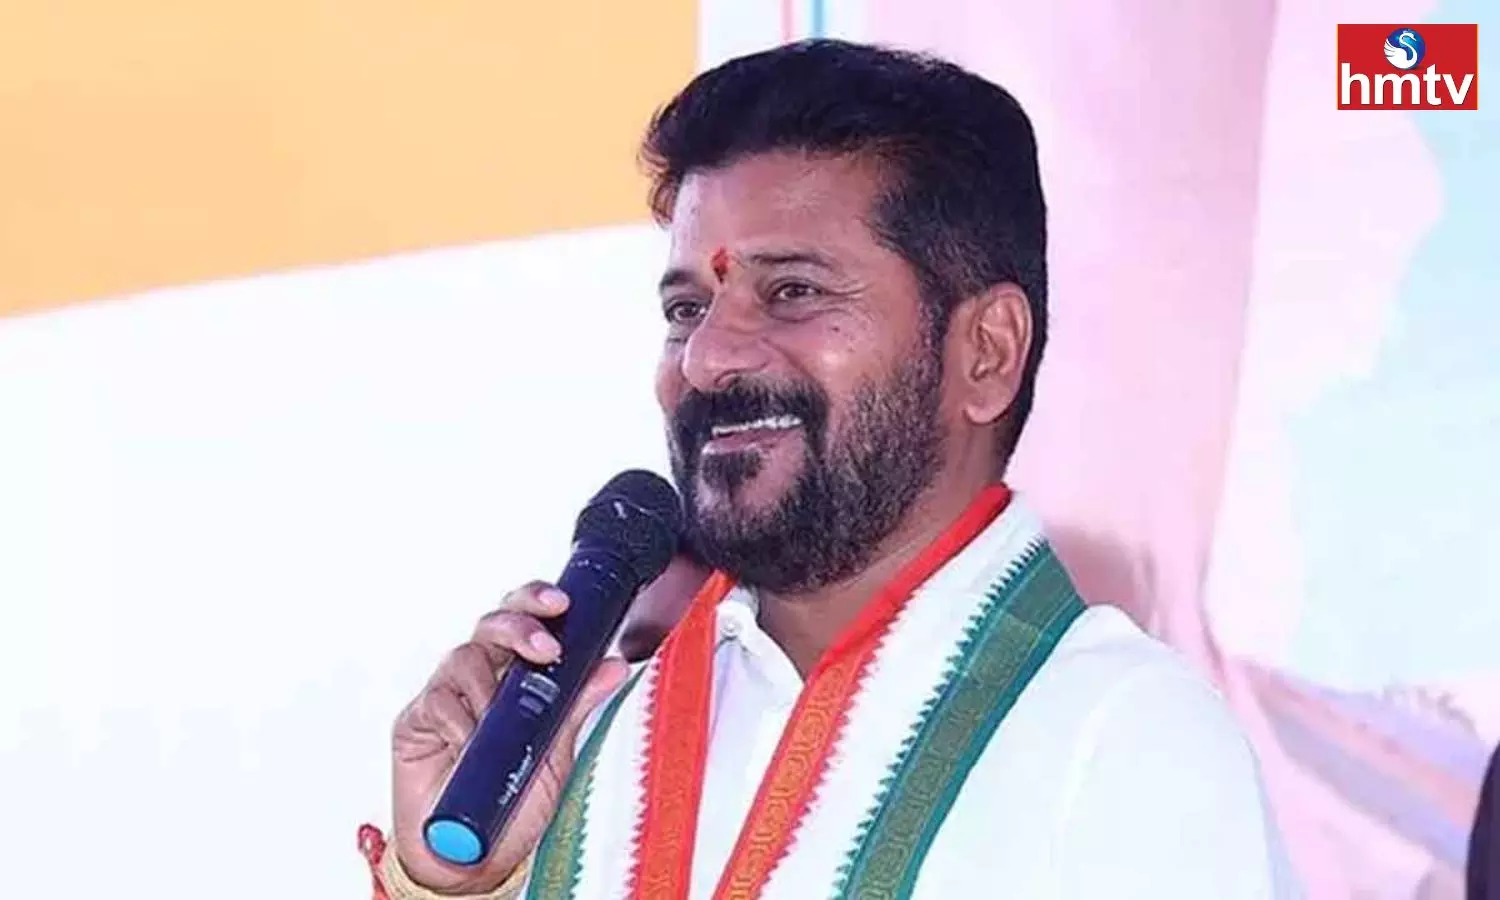 Prime Minister Modi Came To Power Promising To Create 2 Crore Jobs Says Revanth Reddy